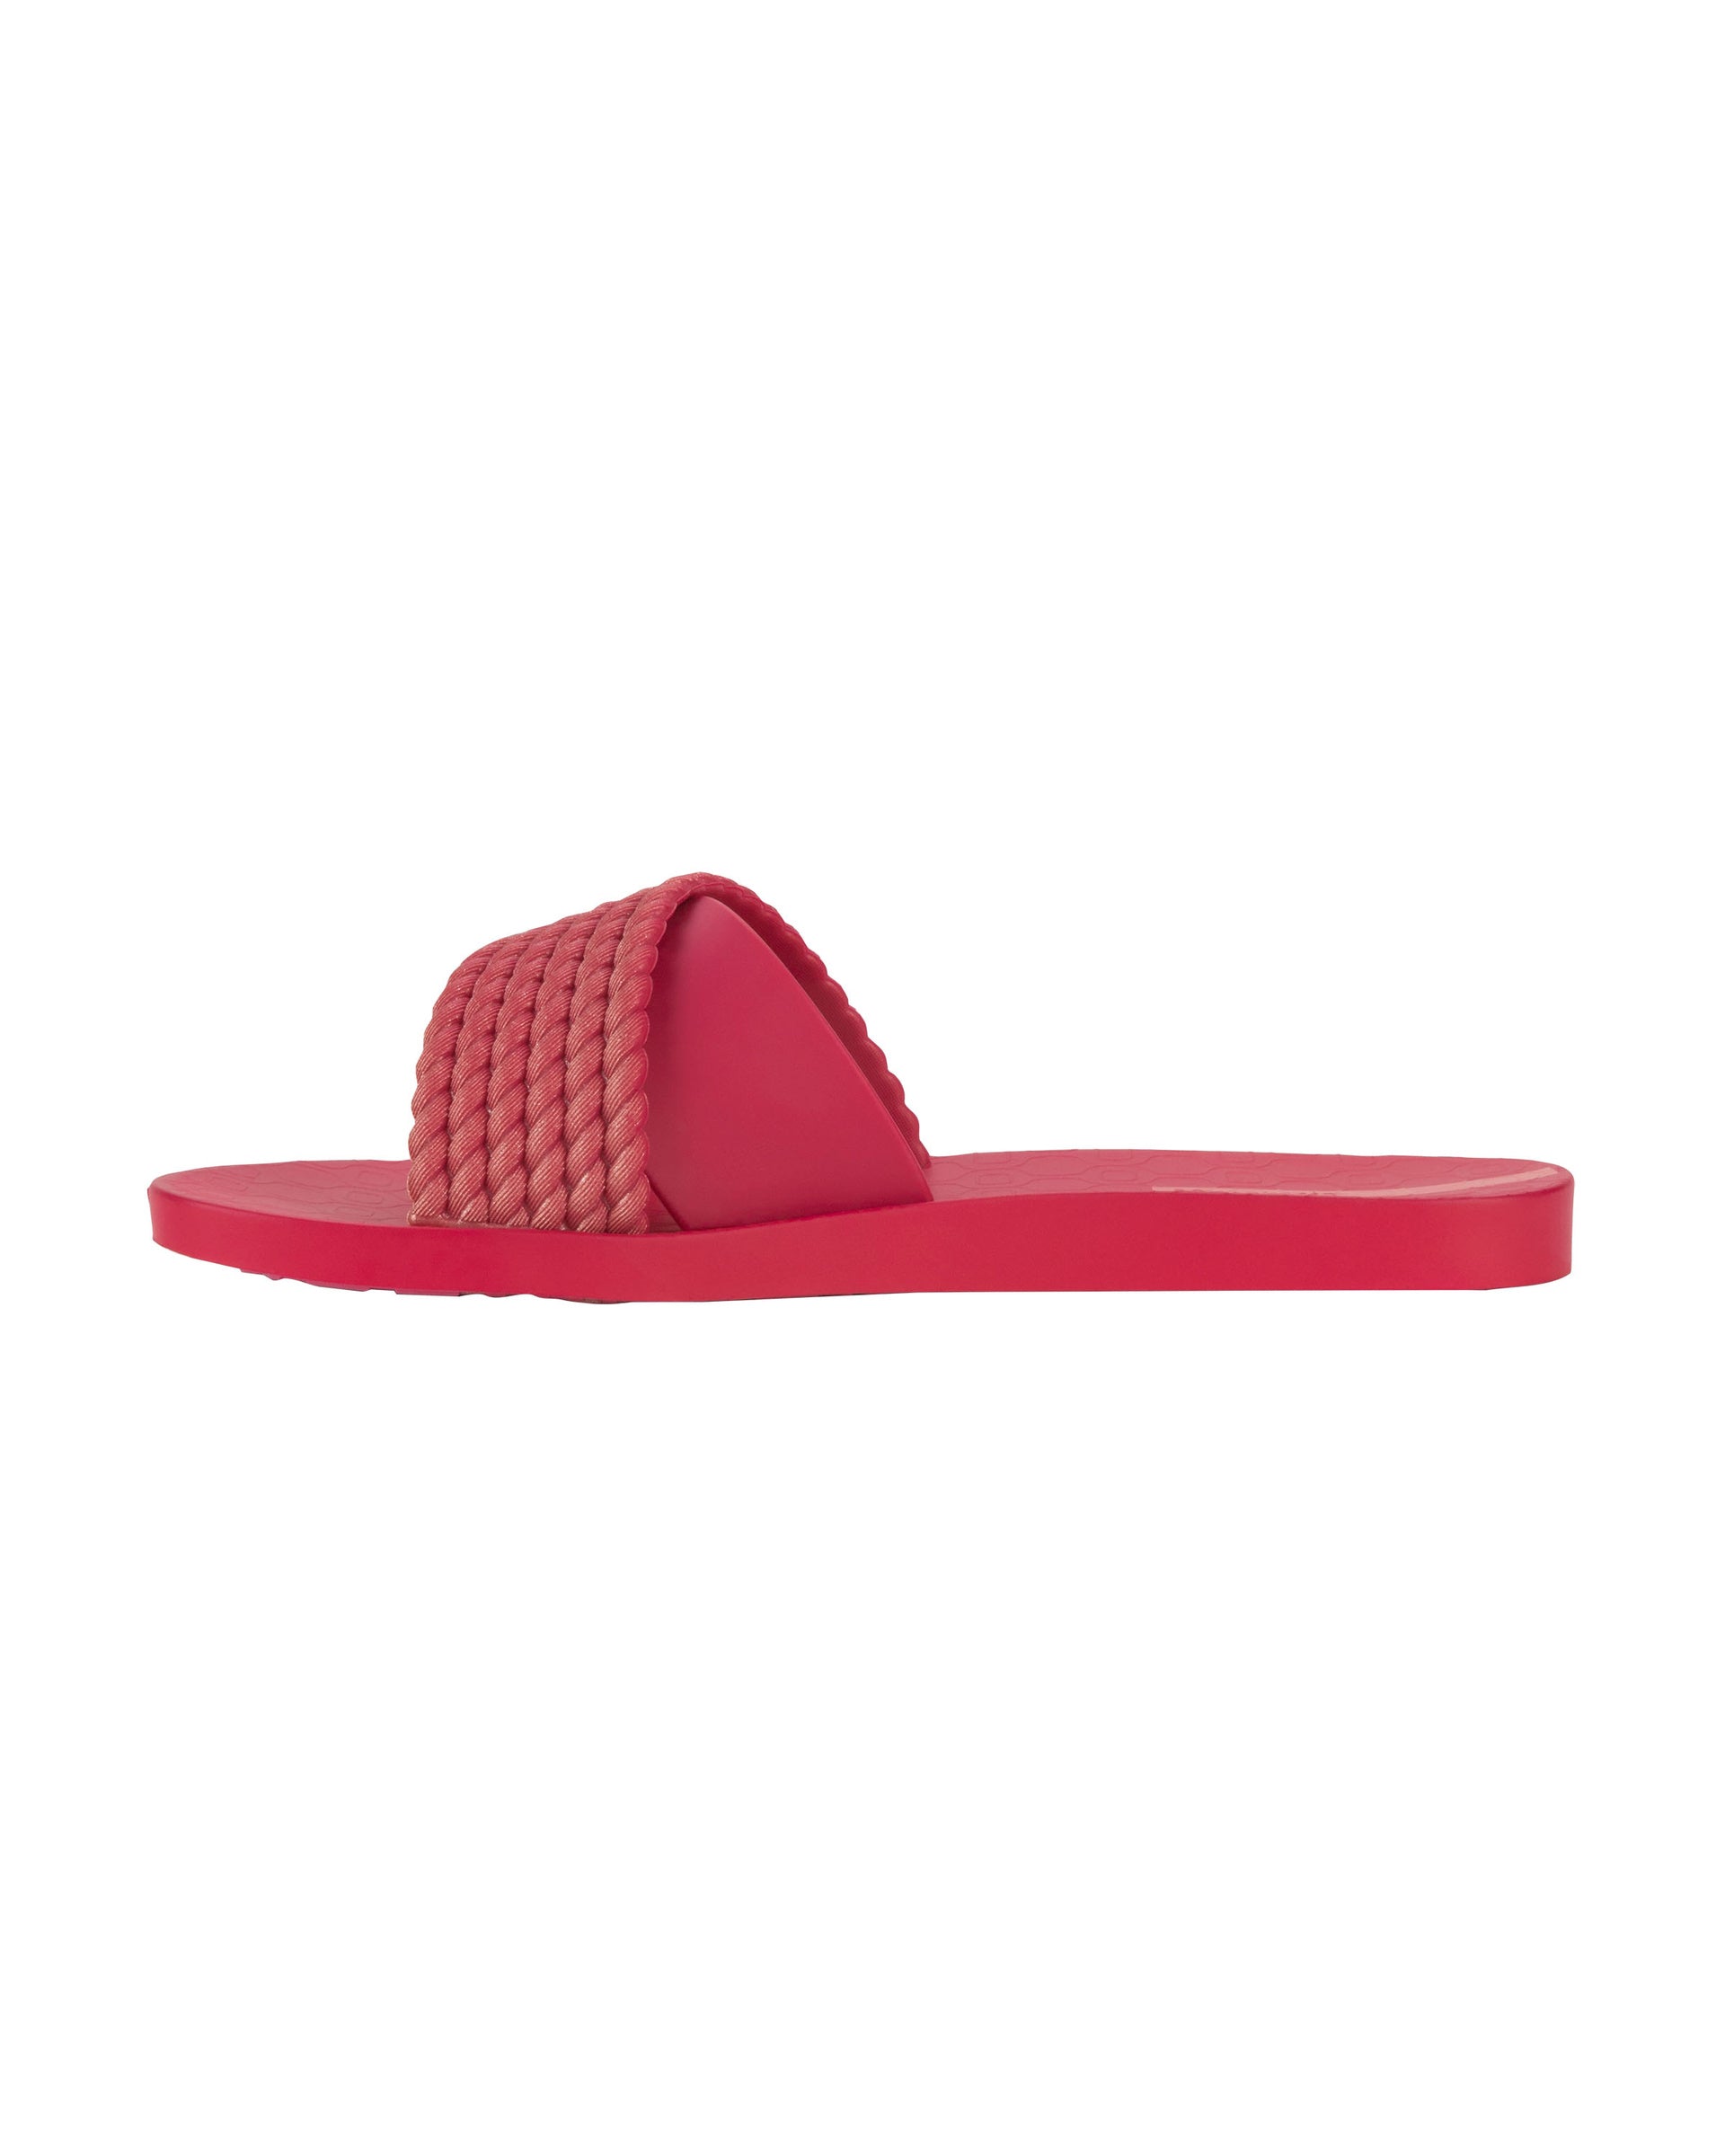 Inner side view of a red Ipanema Street women's slide.